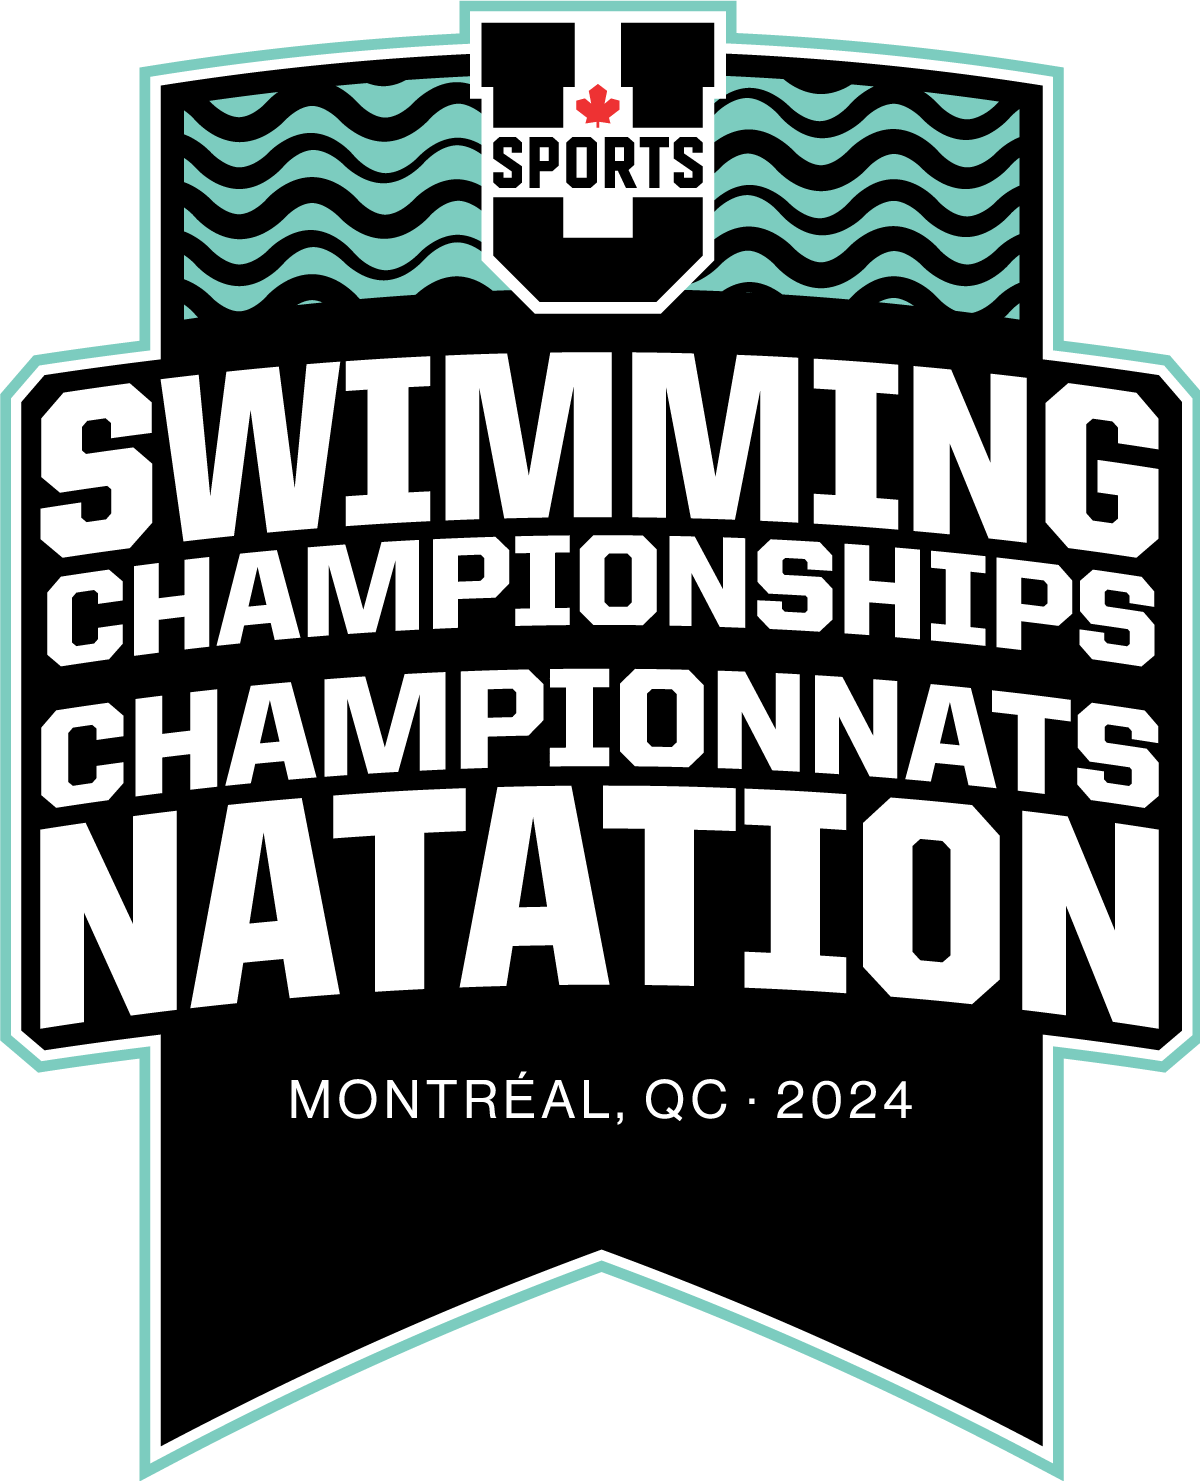 USports_Champ2324_swimming_Primary_CMYK_BL.png (97 KB)